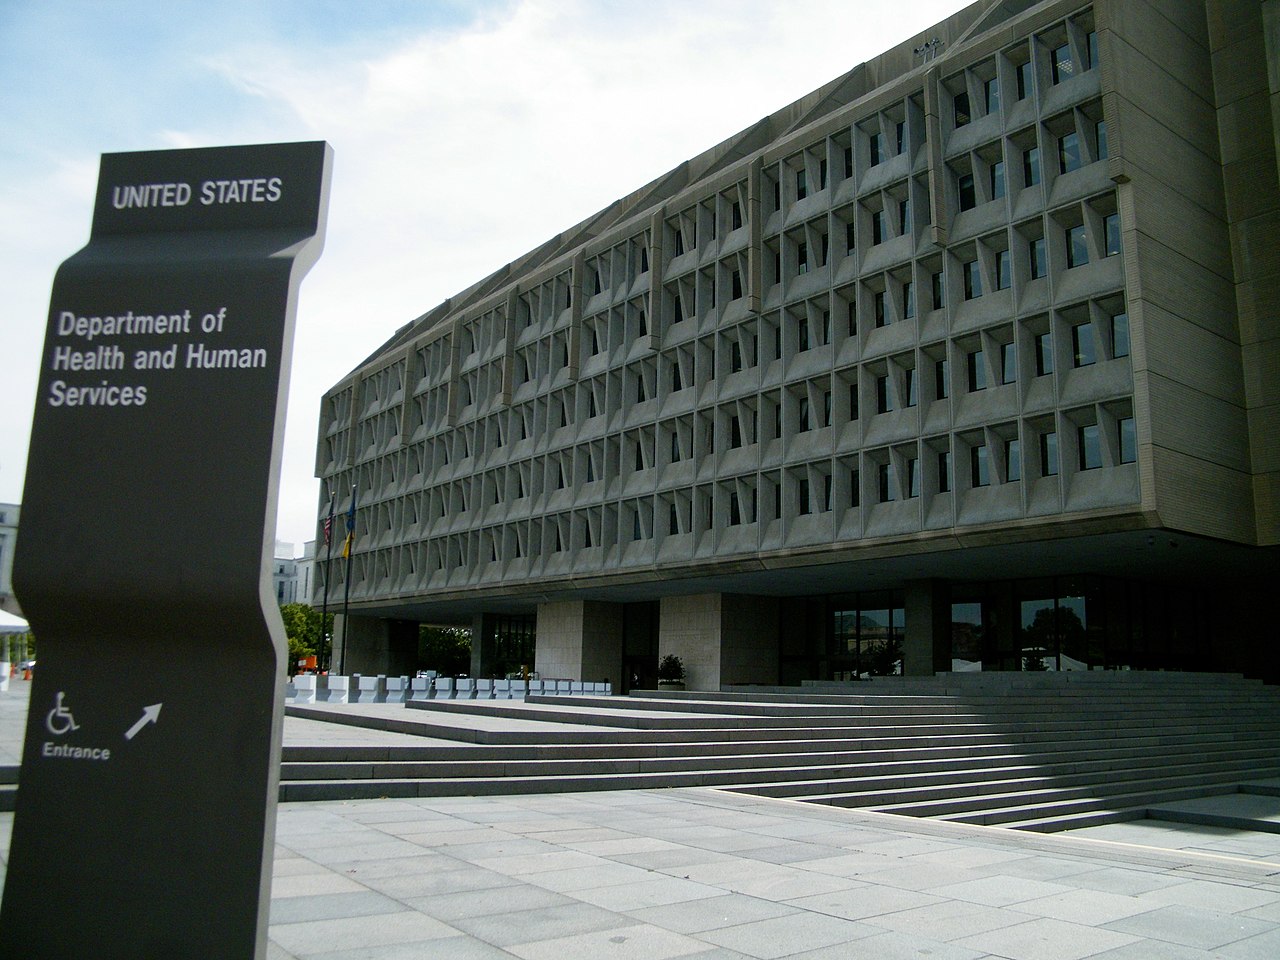 A multi-story government building behind a sign that says "Department of Health and Human Services".